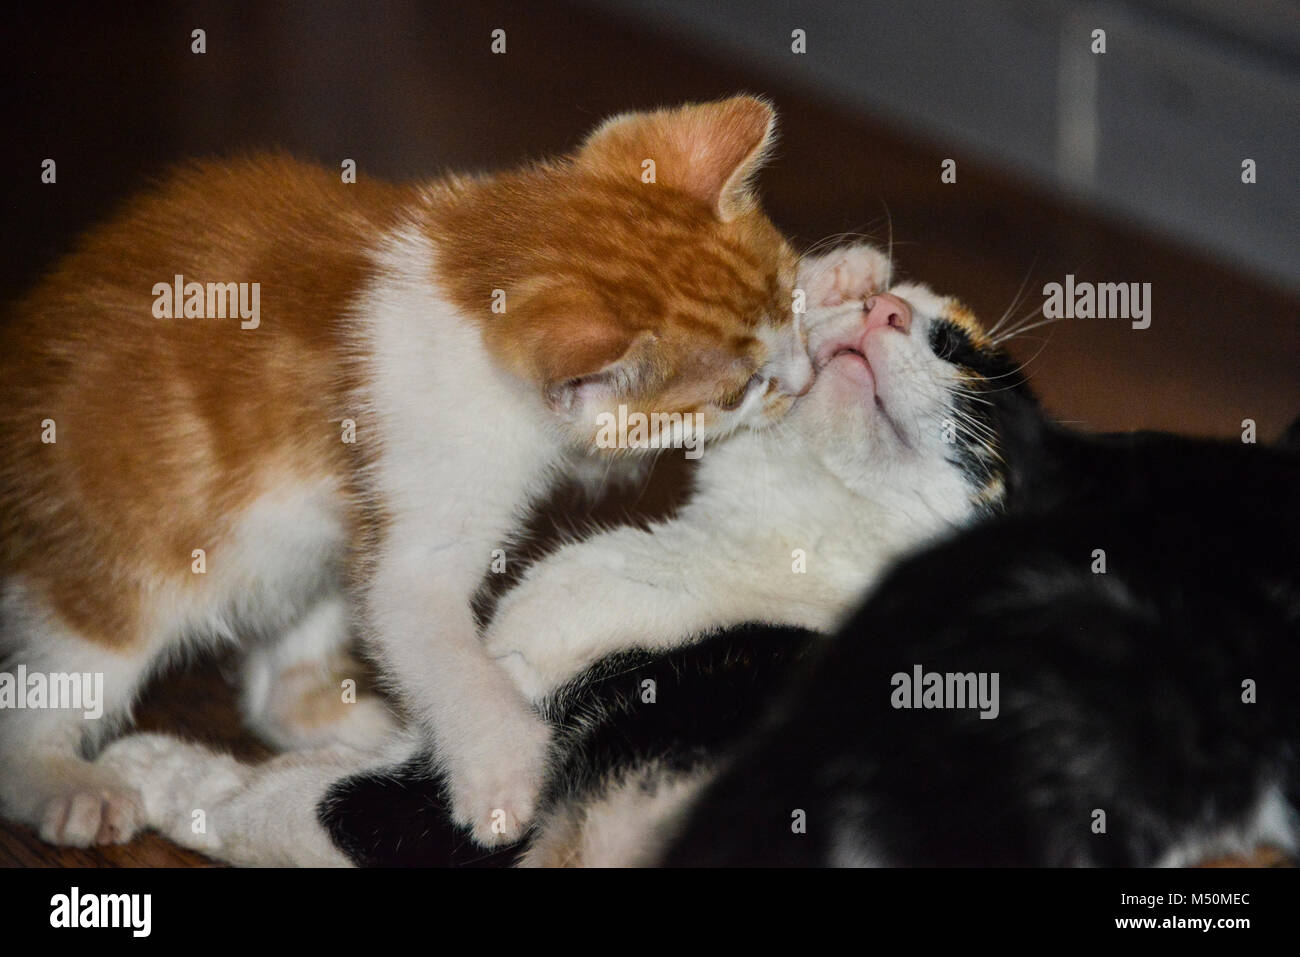 A ginger and white kitten licking its mother Stock Photo